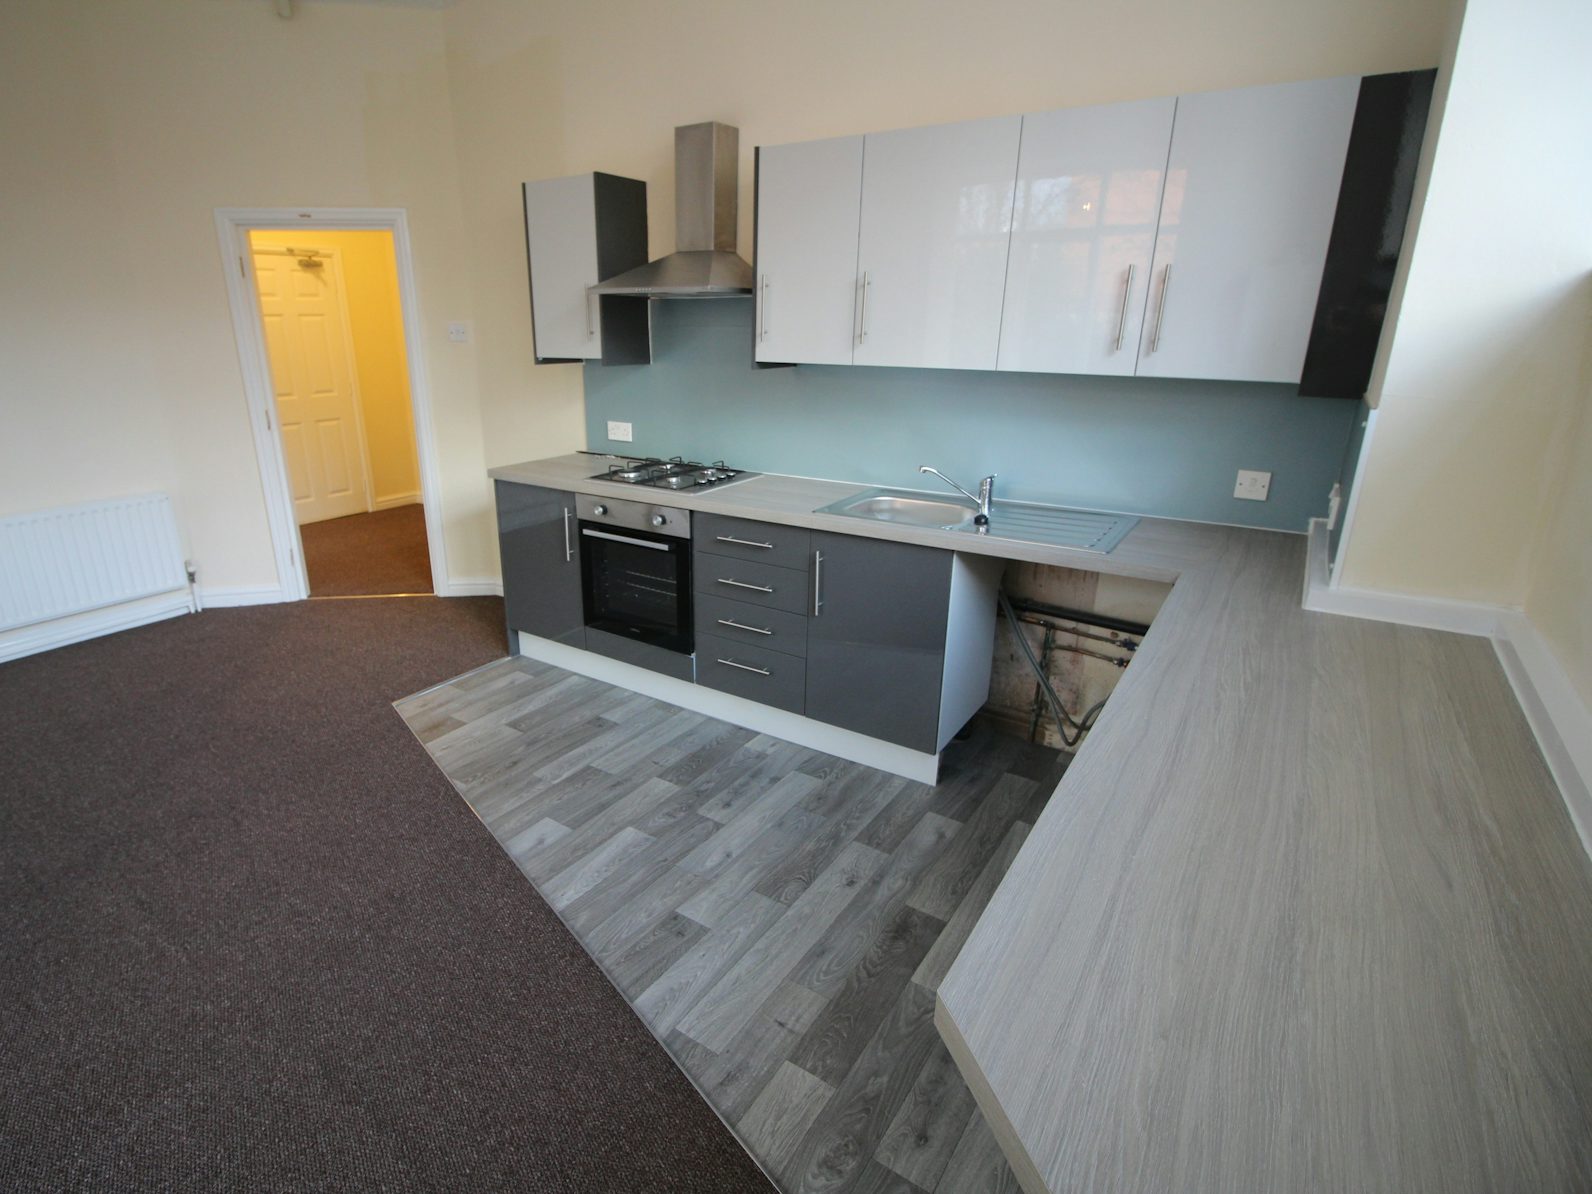 Flat to rent on Hope Road Manchester, M14